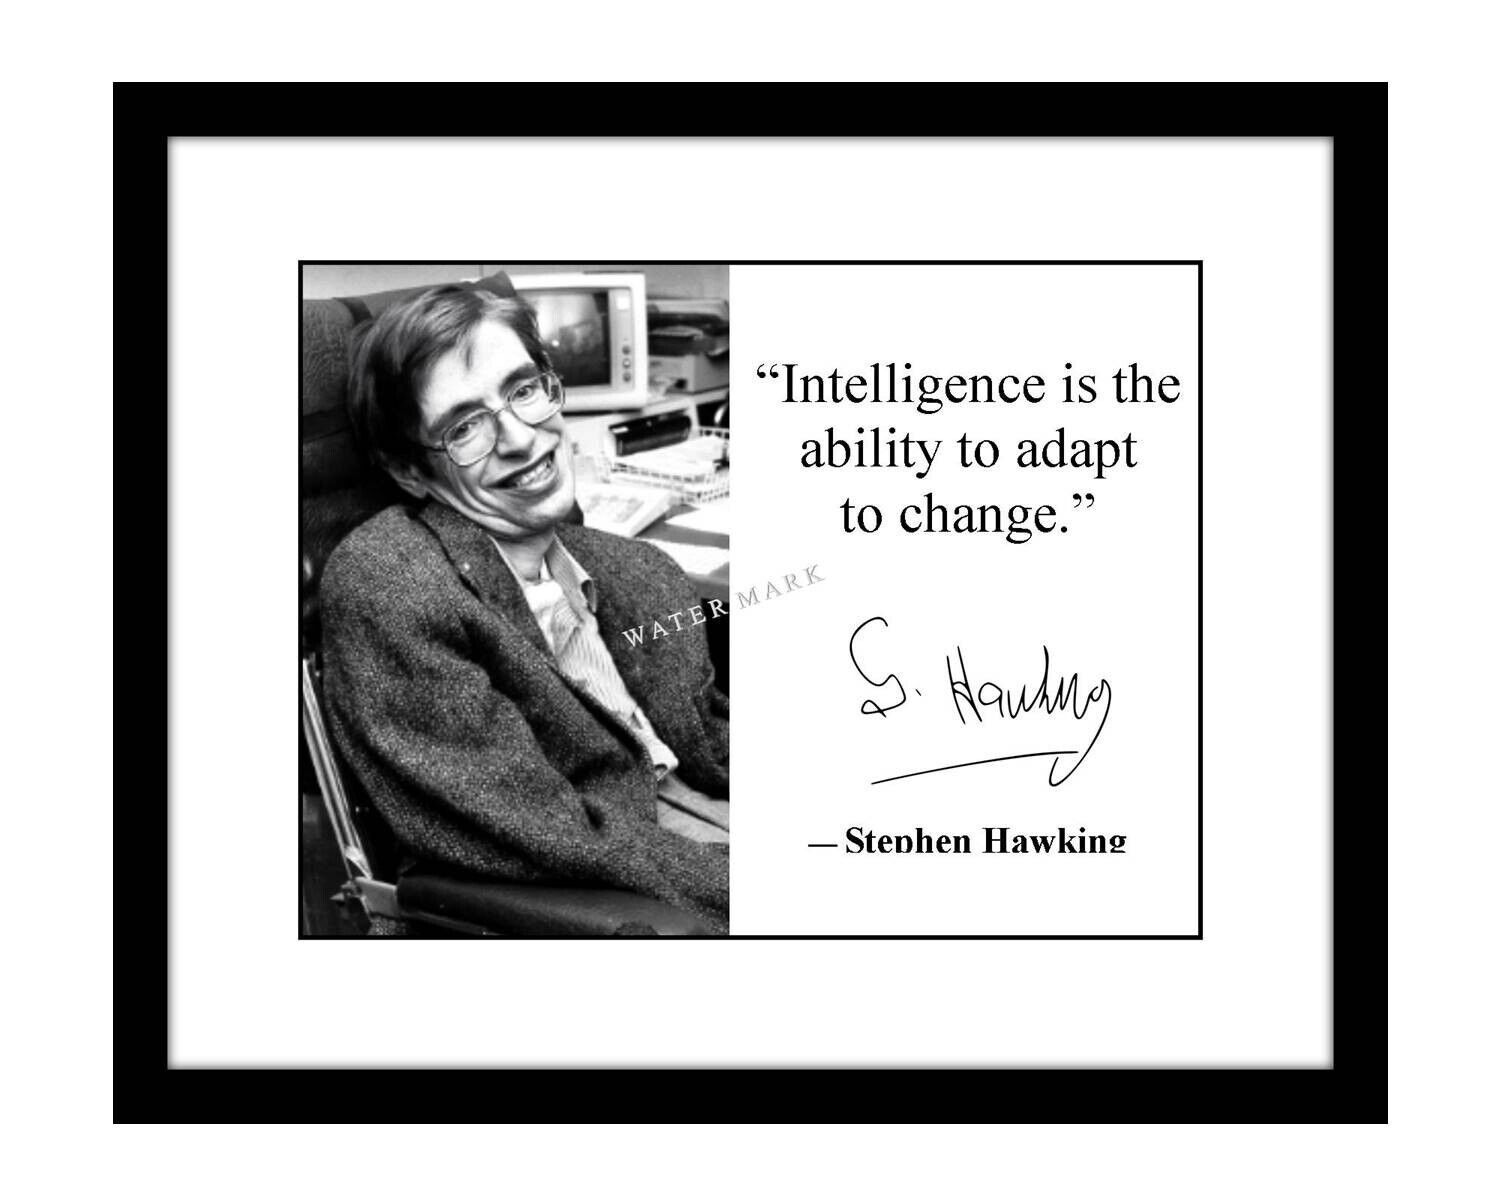 Stephen Hawking 8x10 Signed photo print famous quote astronomy physics scientist